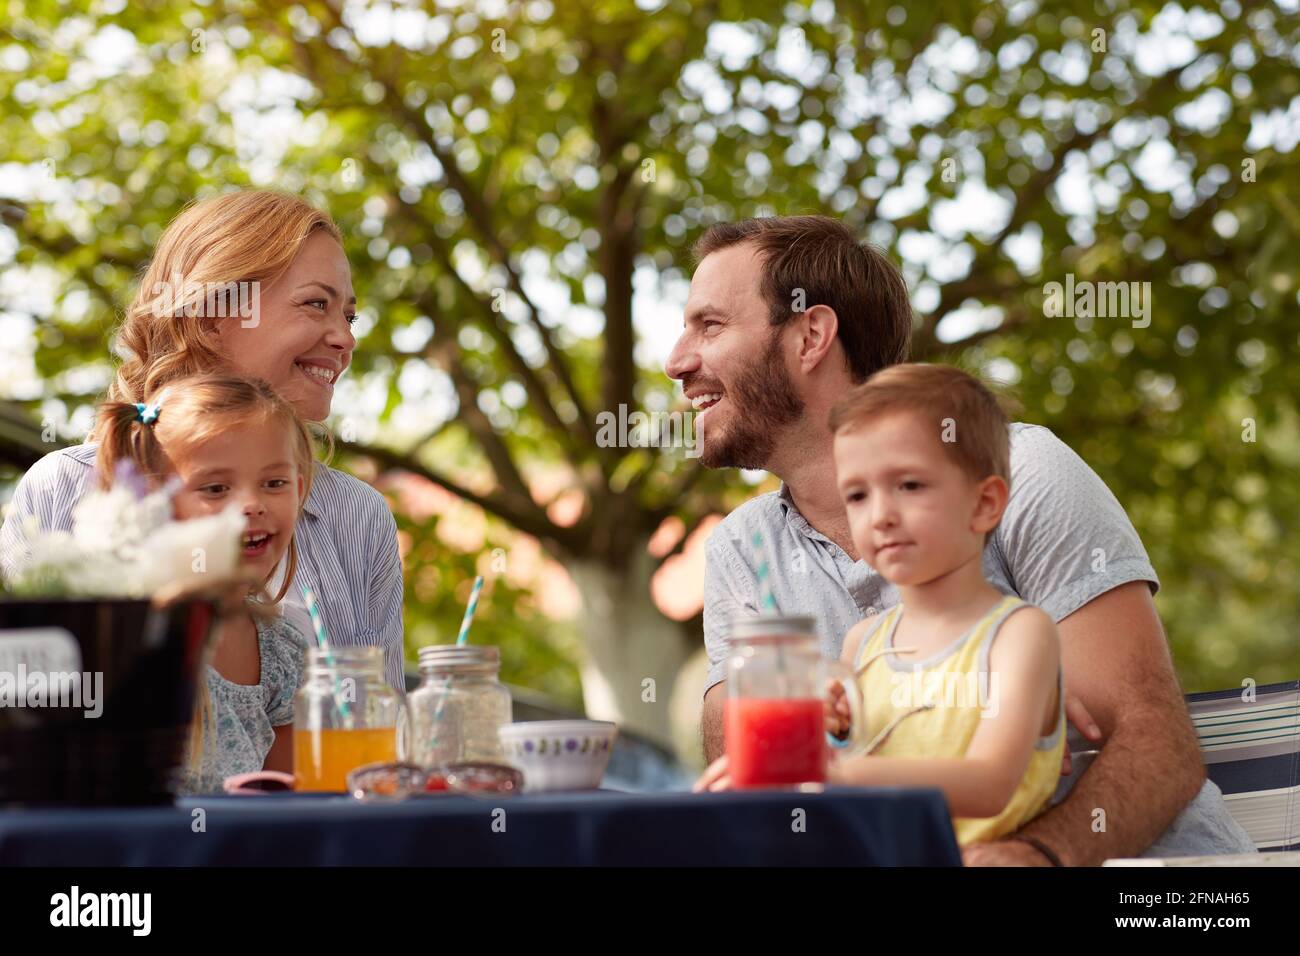 happy caucasian parents looking each other, smiling, with their children in laps, sitting outdoor Stock Photo